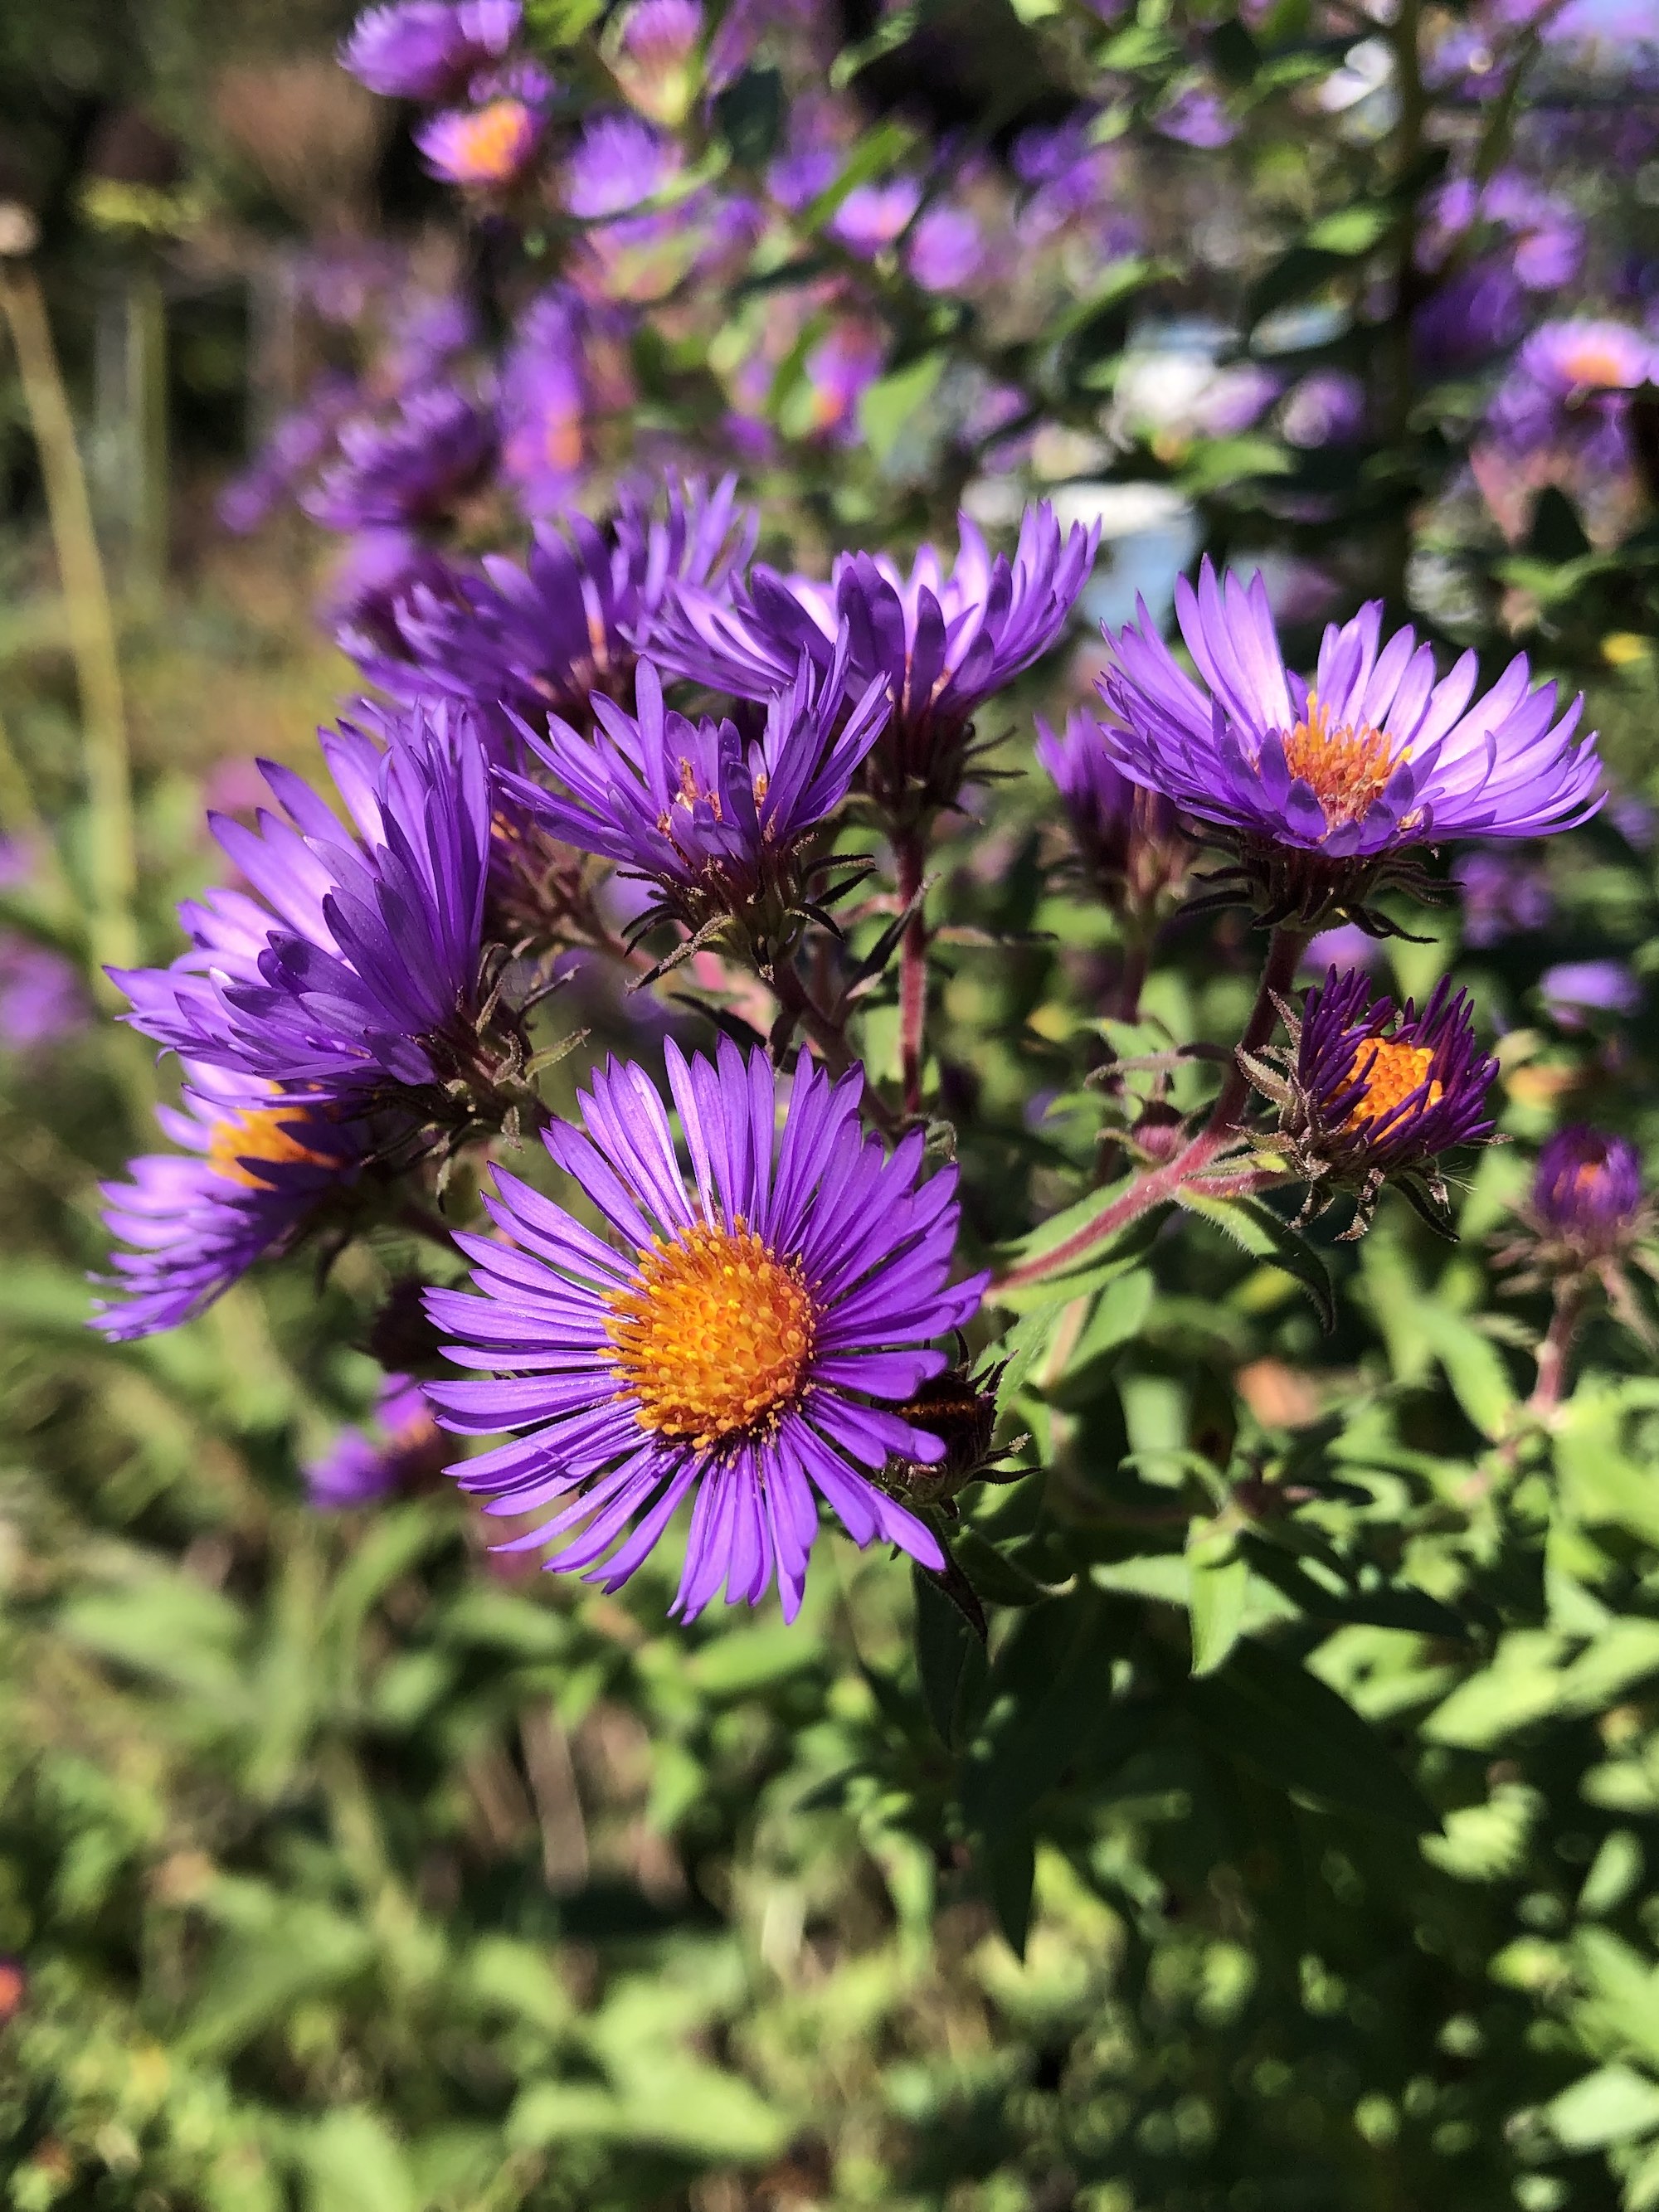 New England Aster on shore of Marion Dunn Pond in Madison, Wisconsin on September 18, 2022.